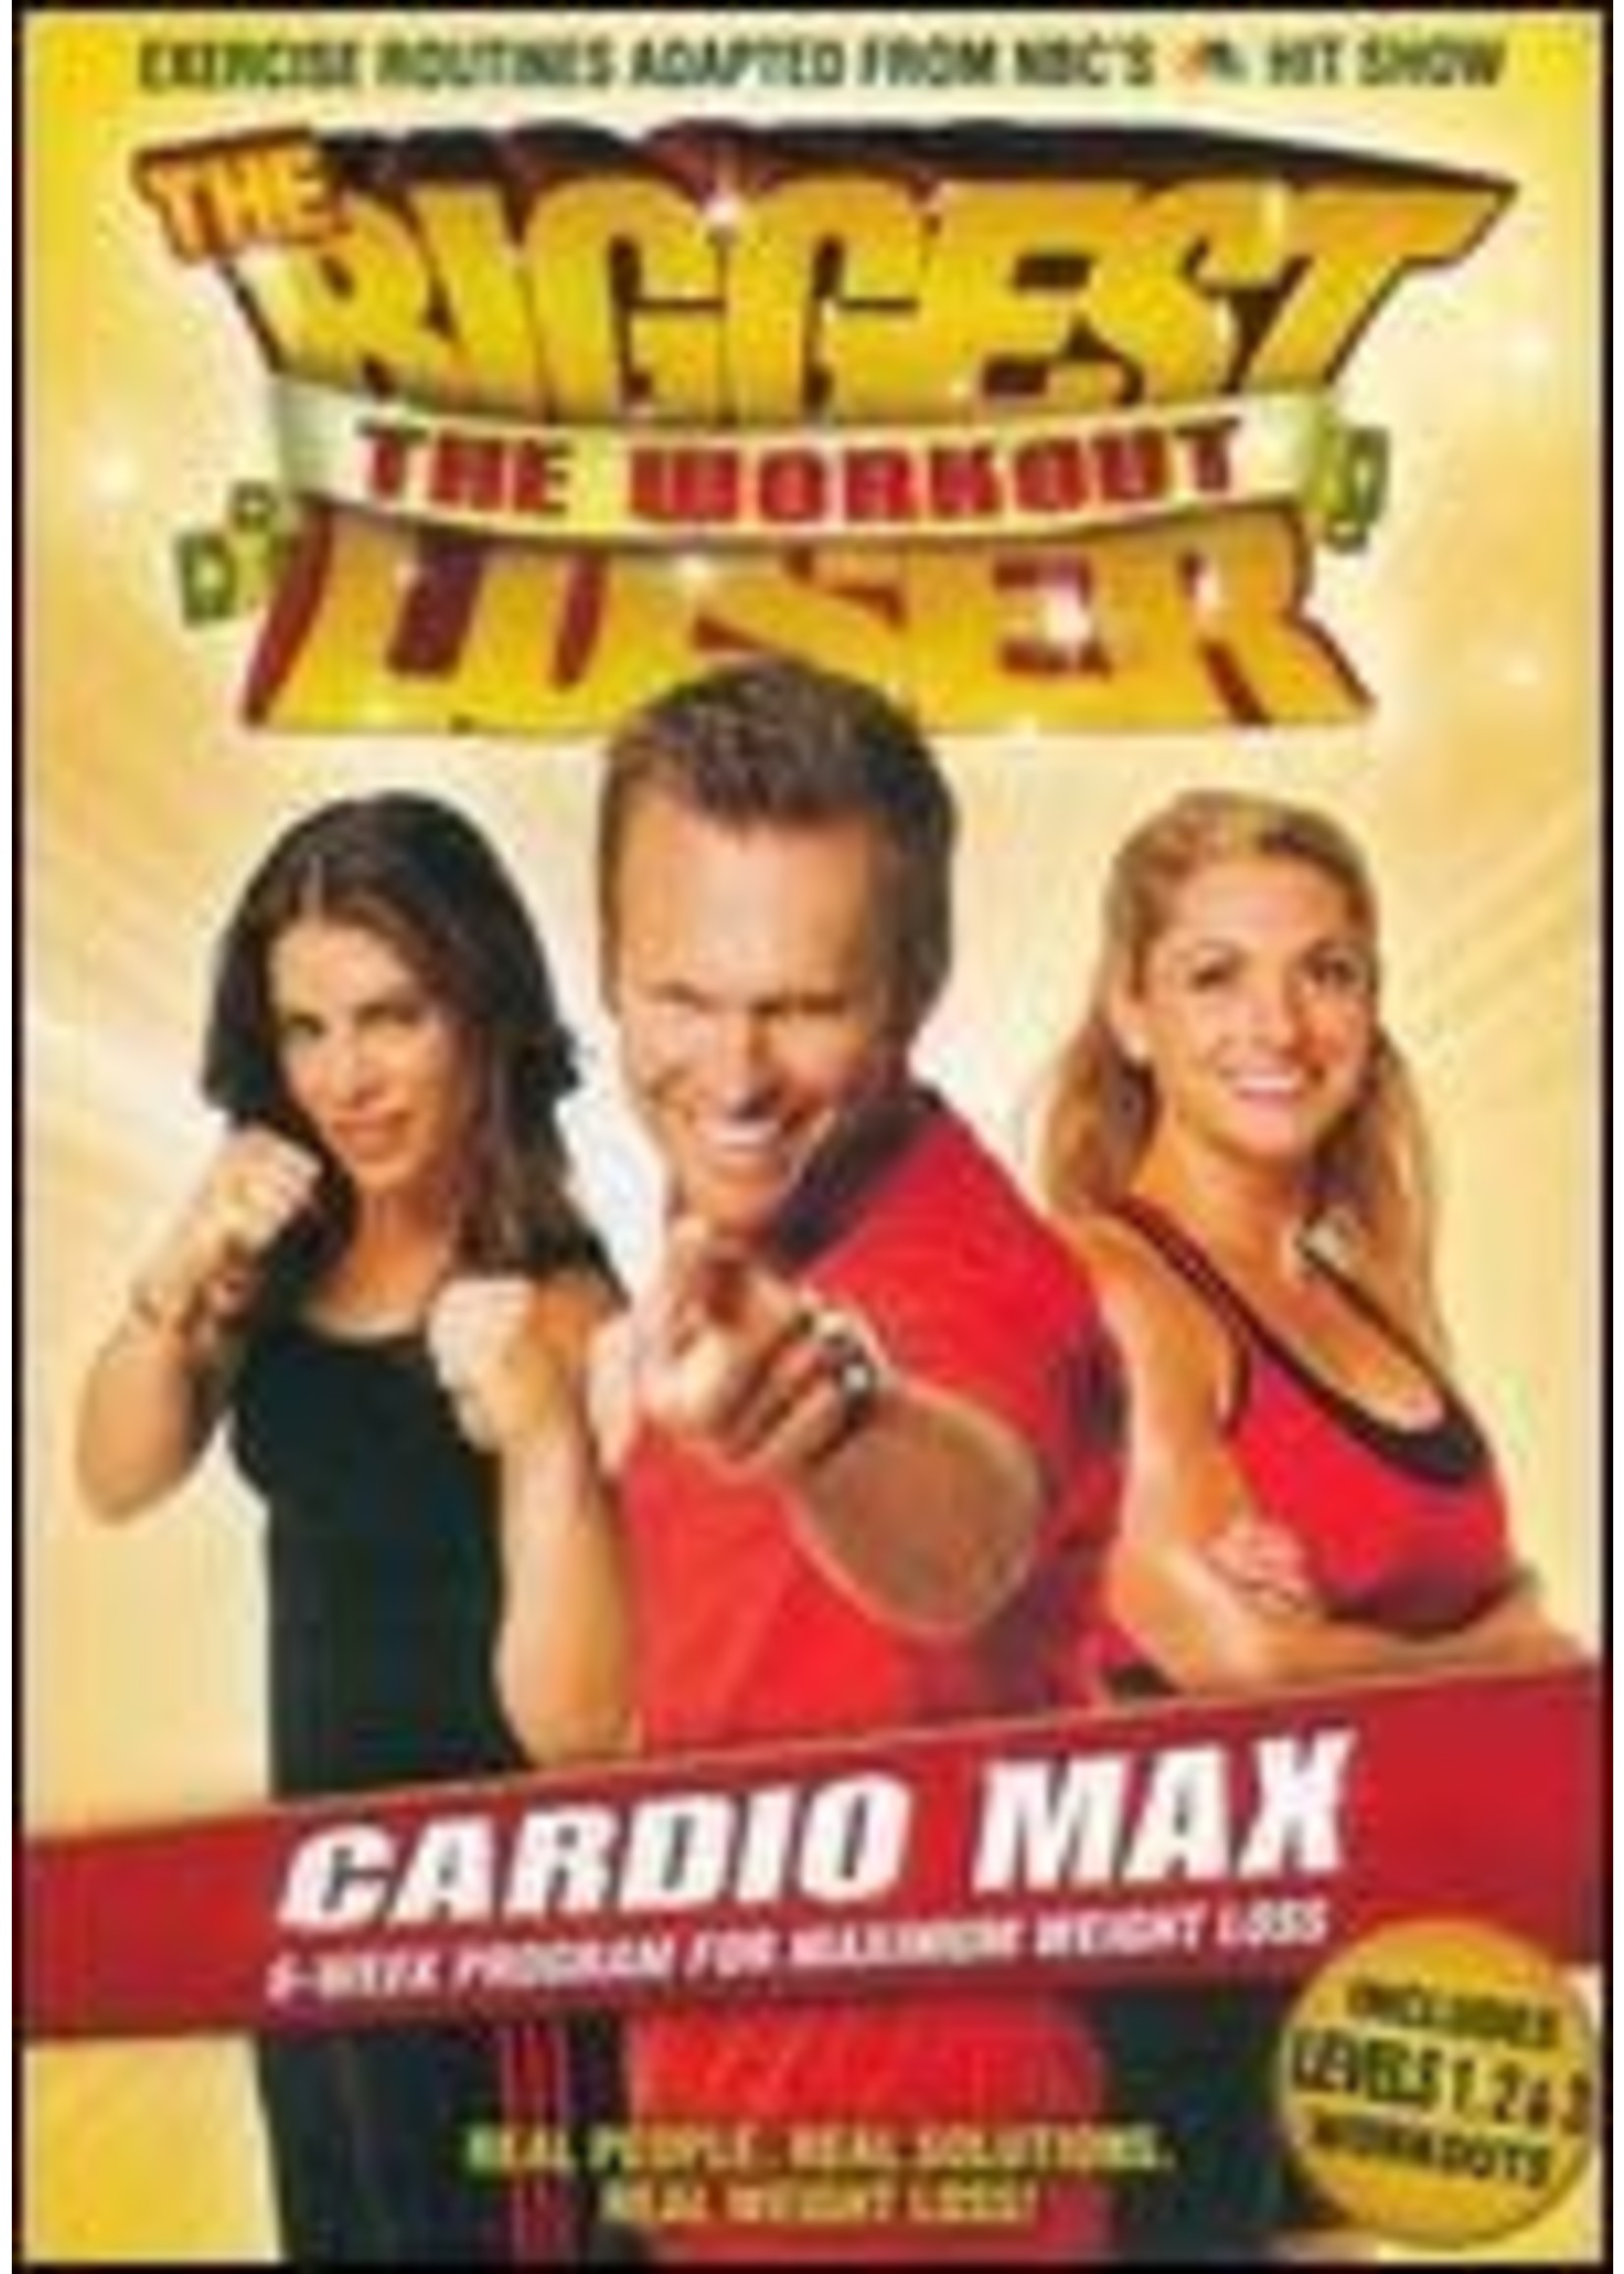 Biggest Loser Workout: Cardio Max DVD